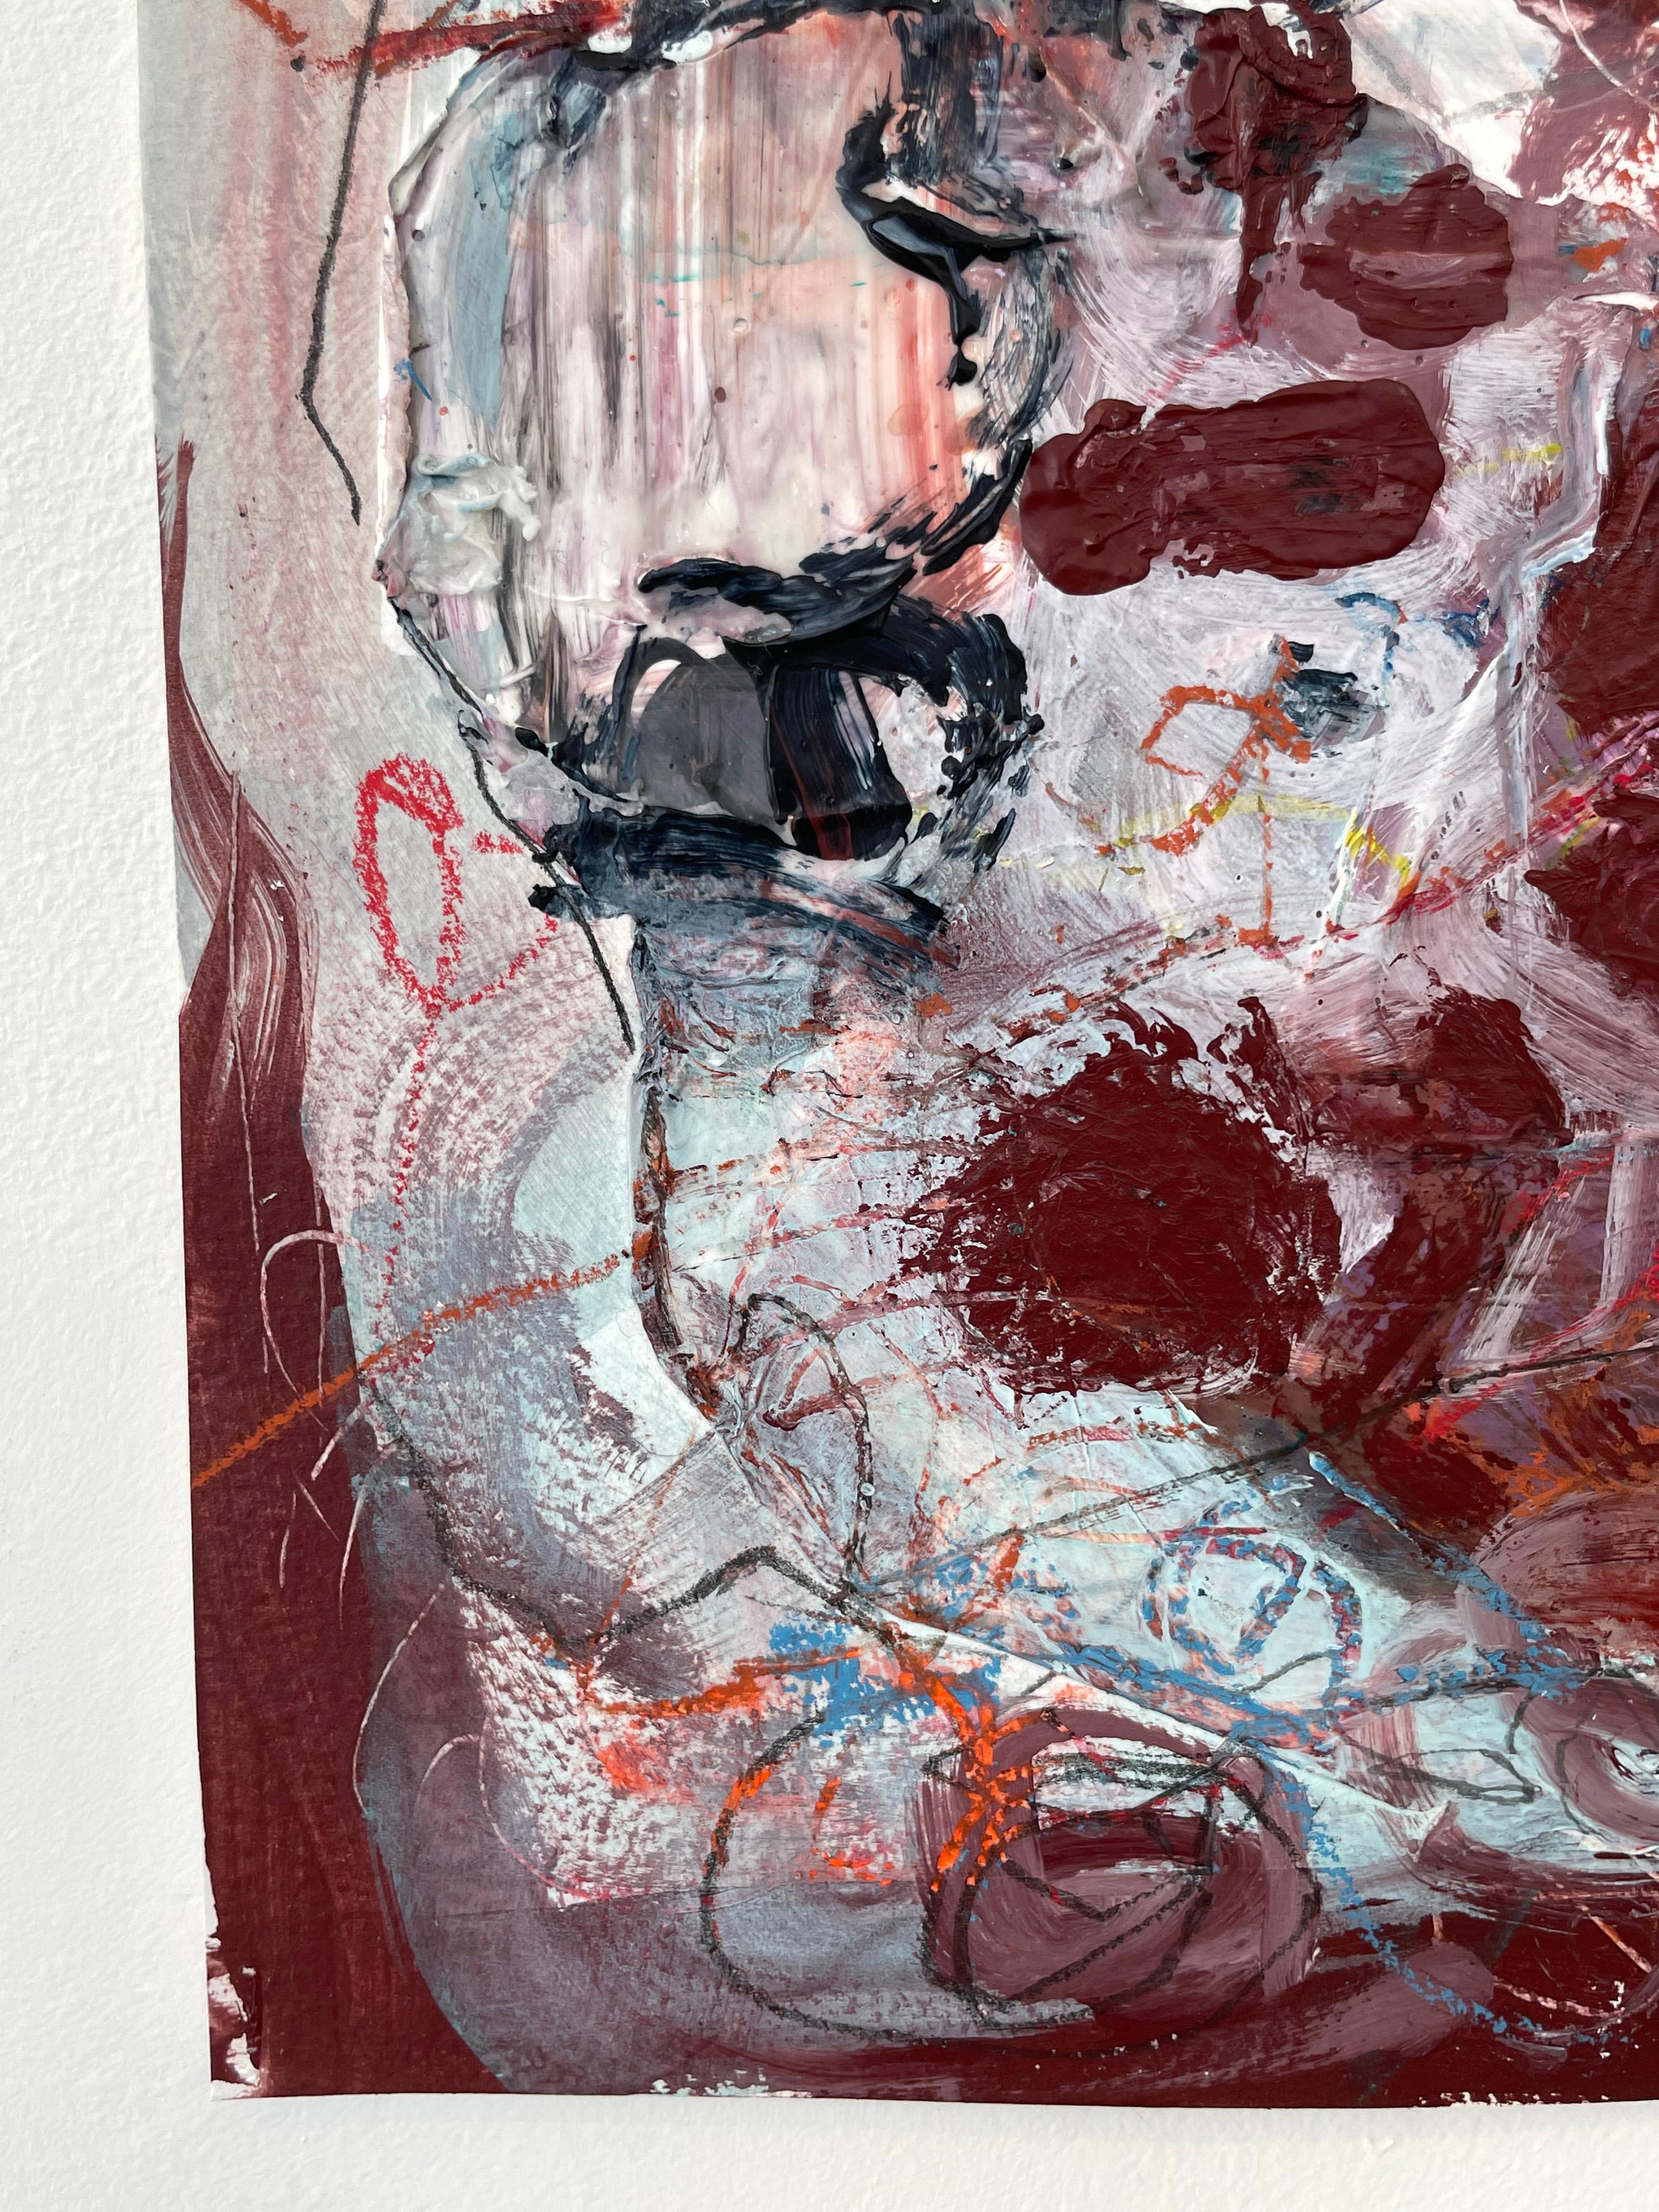 Small Works on Paper, Untitled #15 - Painting by Stephanie Visser 